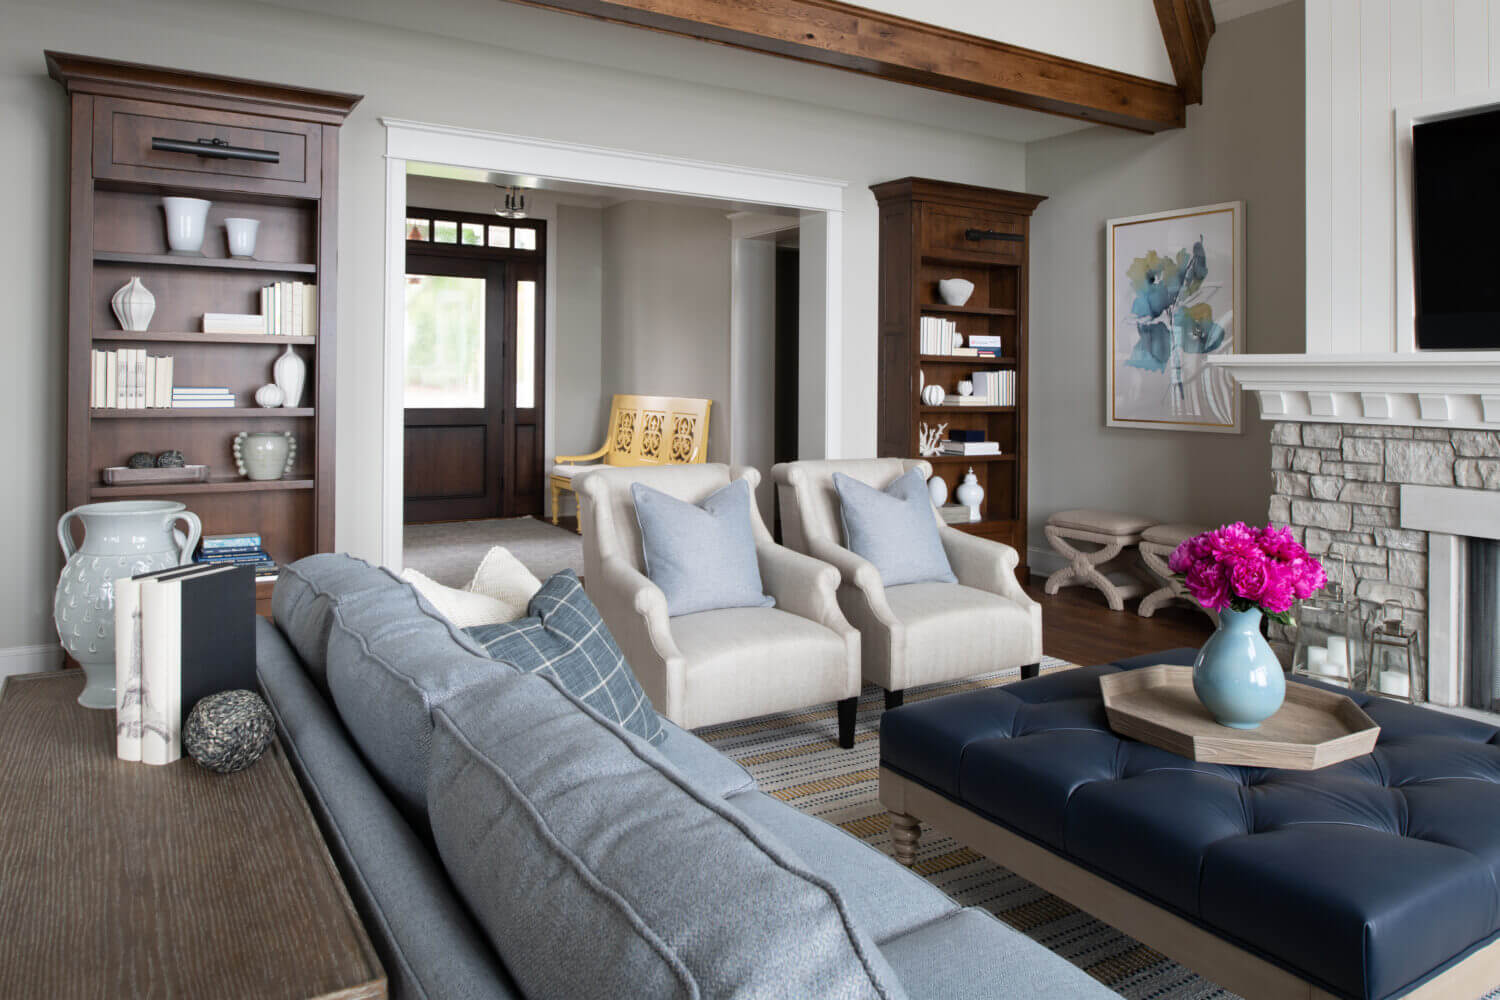 A coastal style living room with built-in bookcases and cabinetry from Dura Supreme.